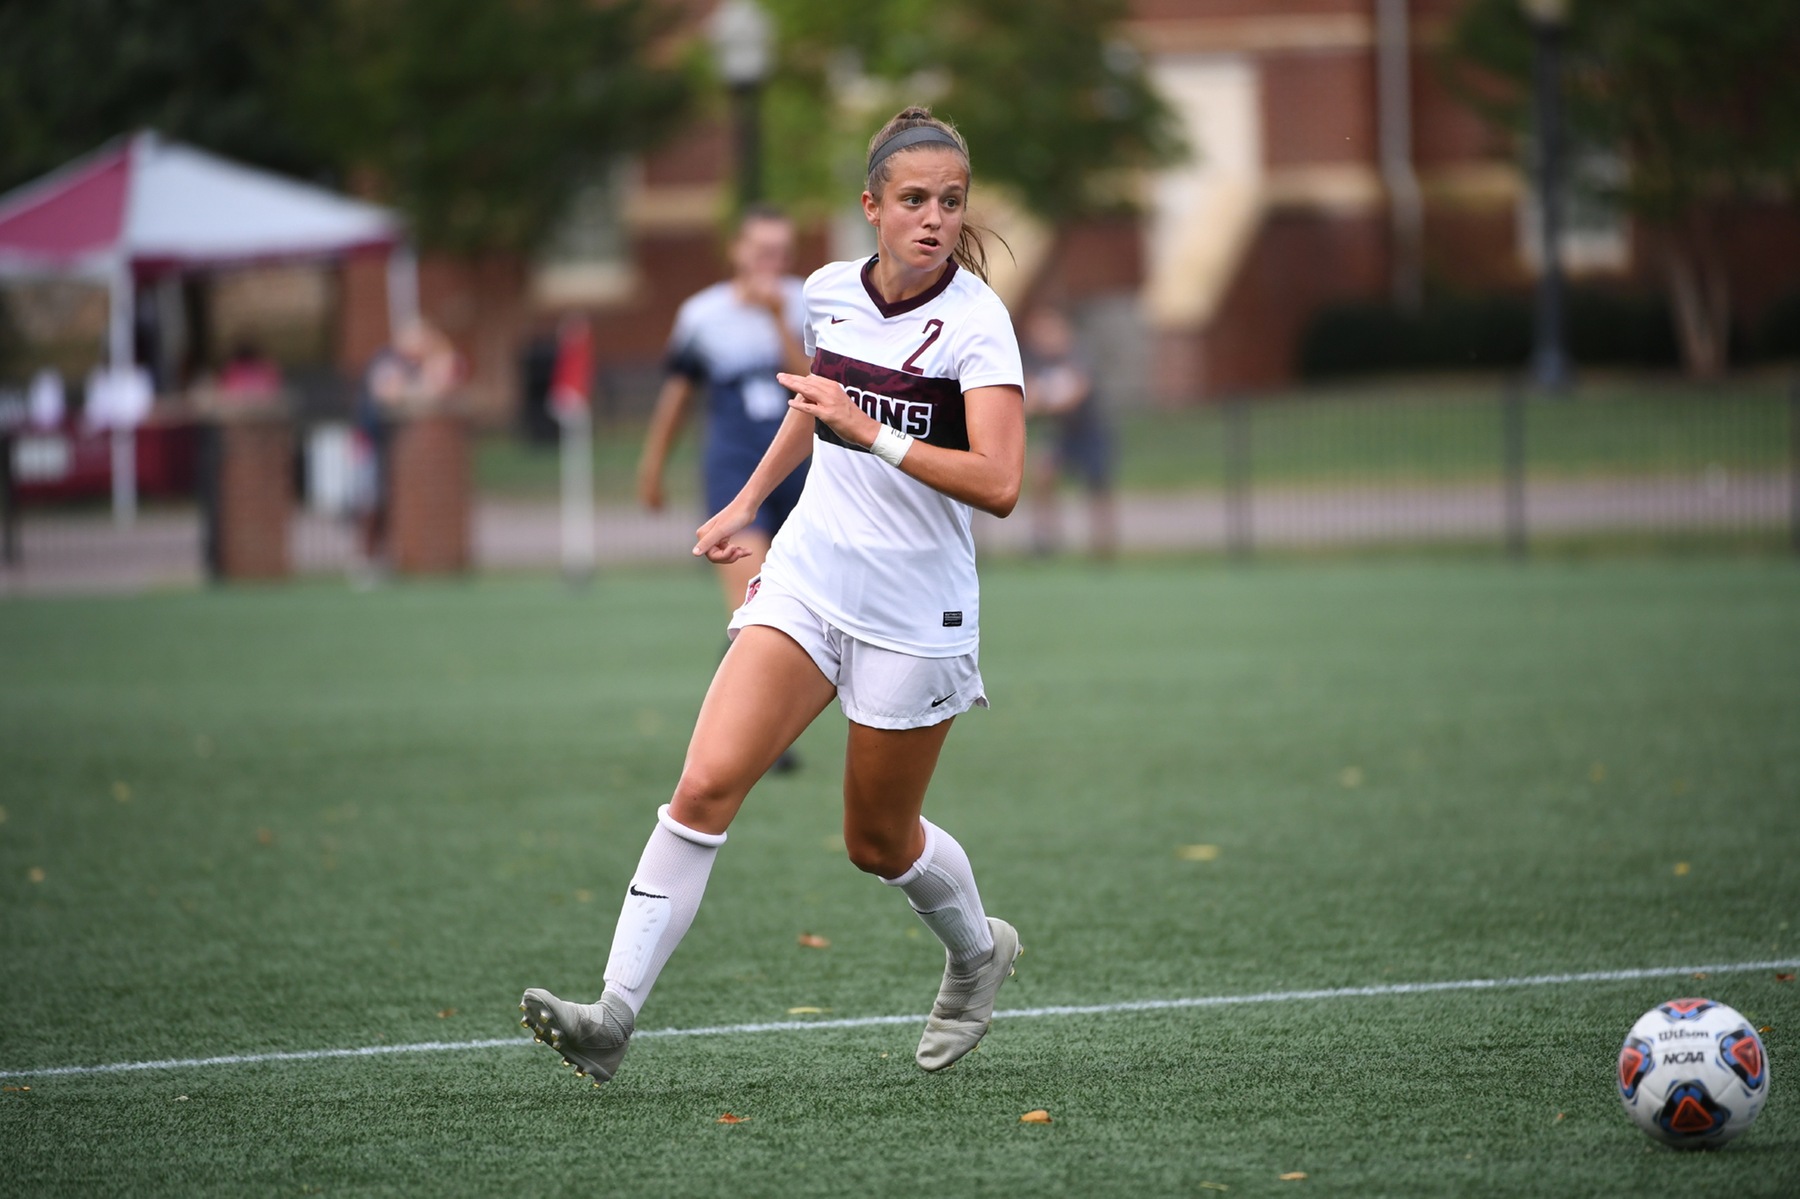 Washington and Lee slipped by Roanoke 1-0 in ODAC Women’s Soccer on Wednesday night.